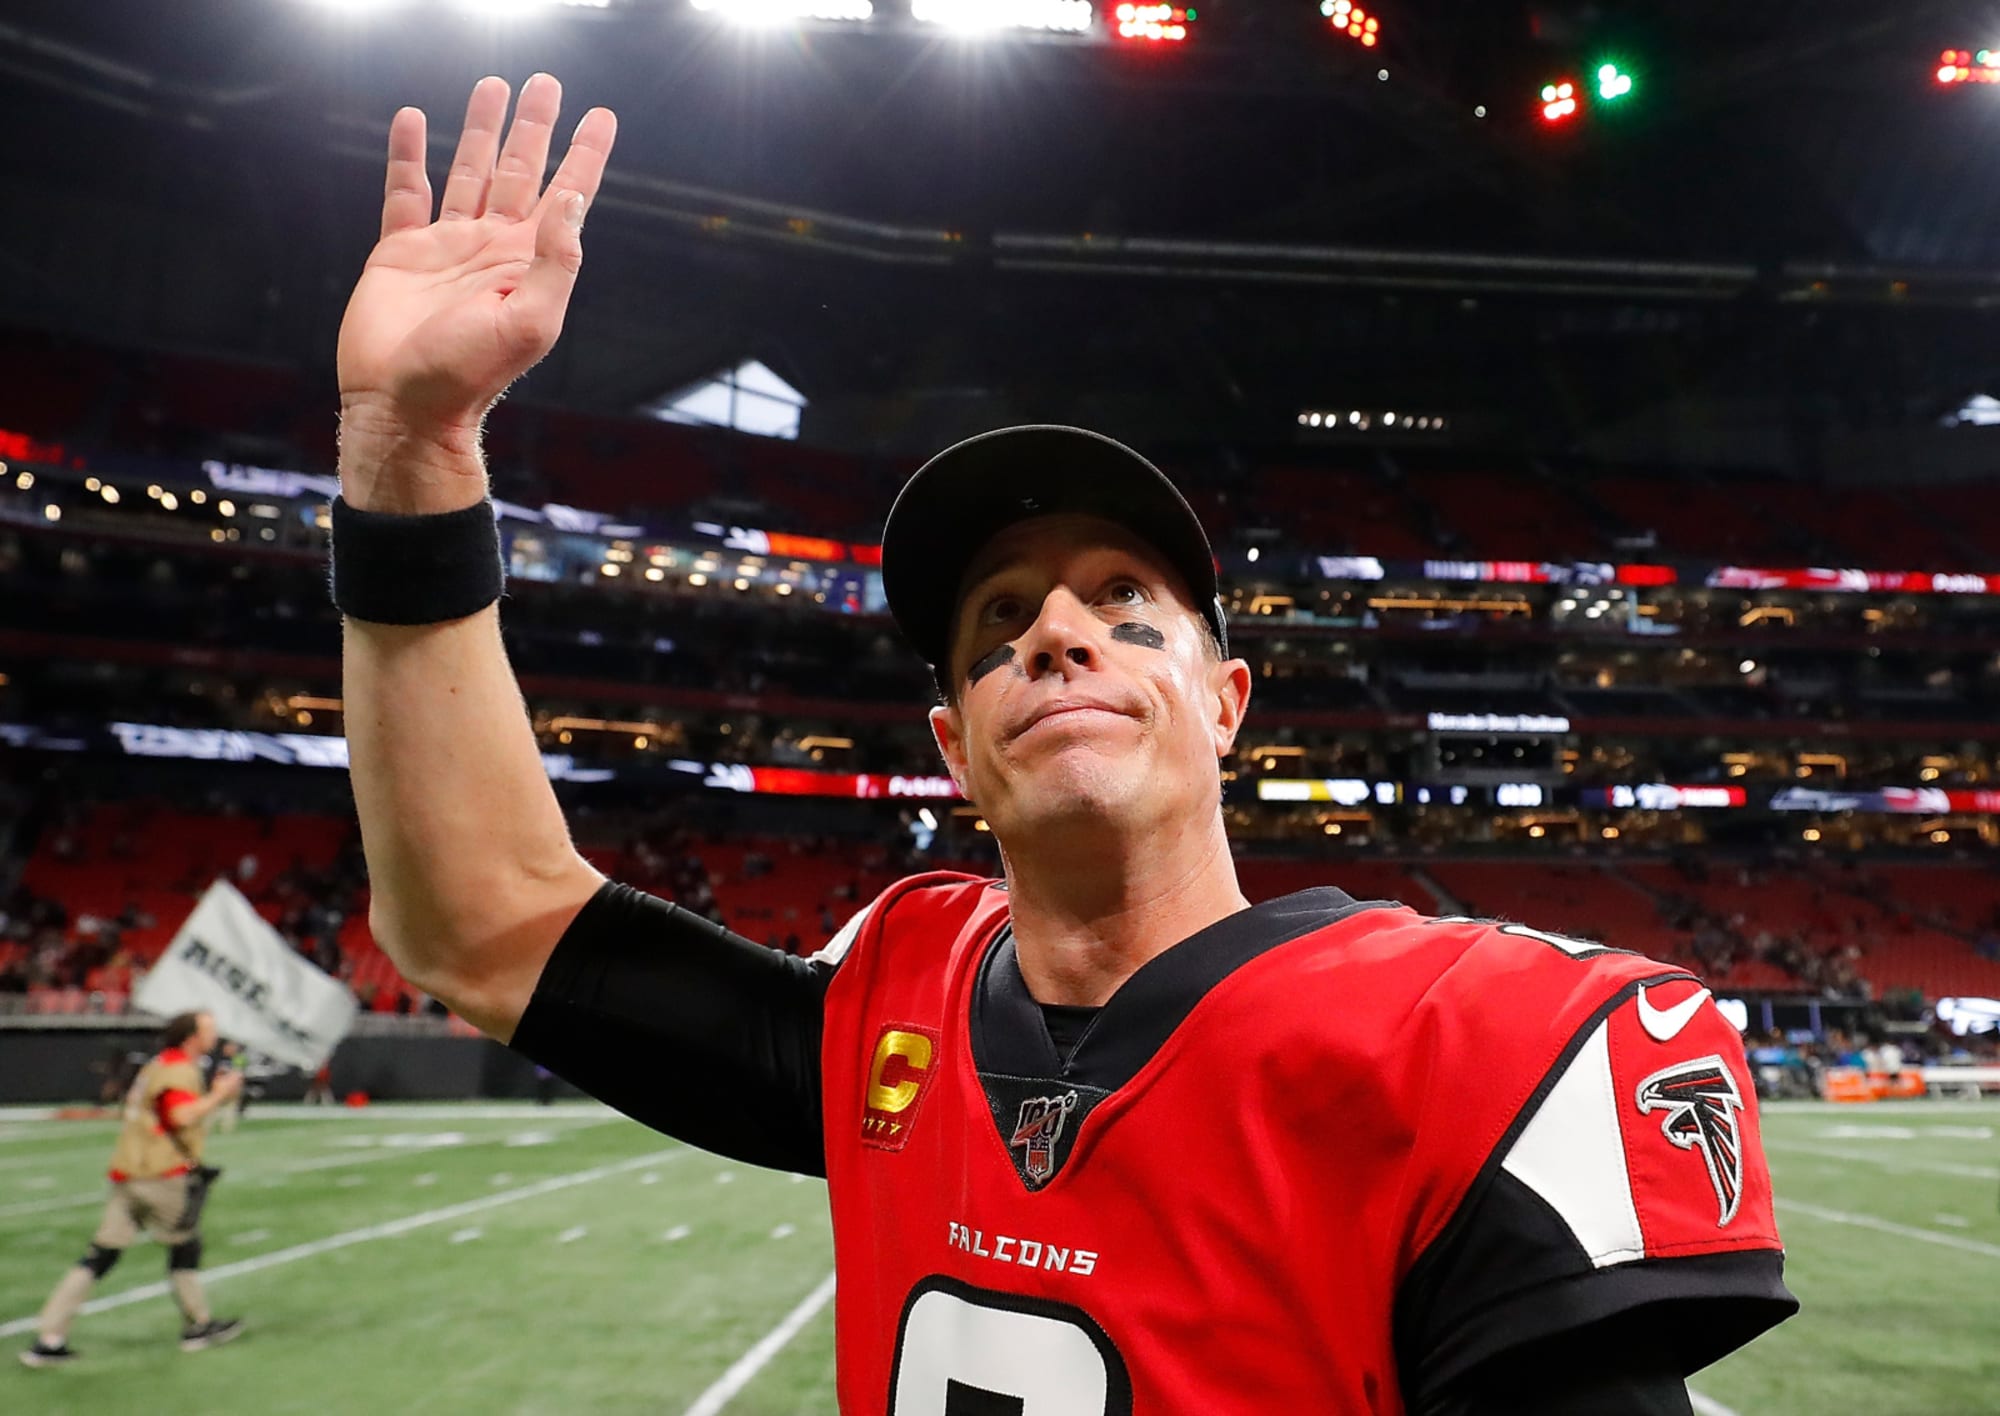 There is no debate as to who the greatest Atlanta Falcons quarterback is